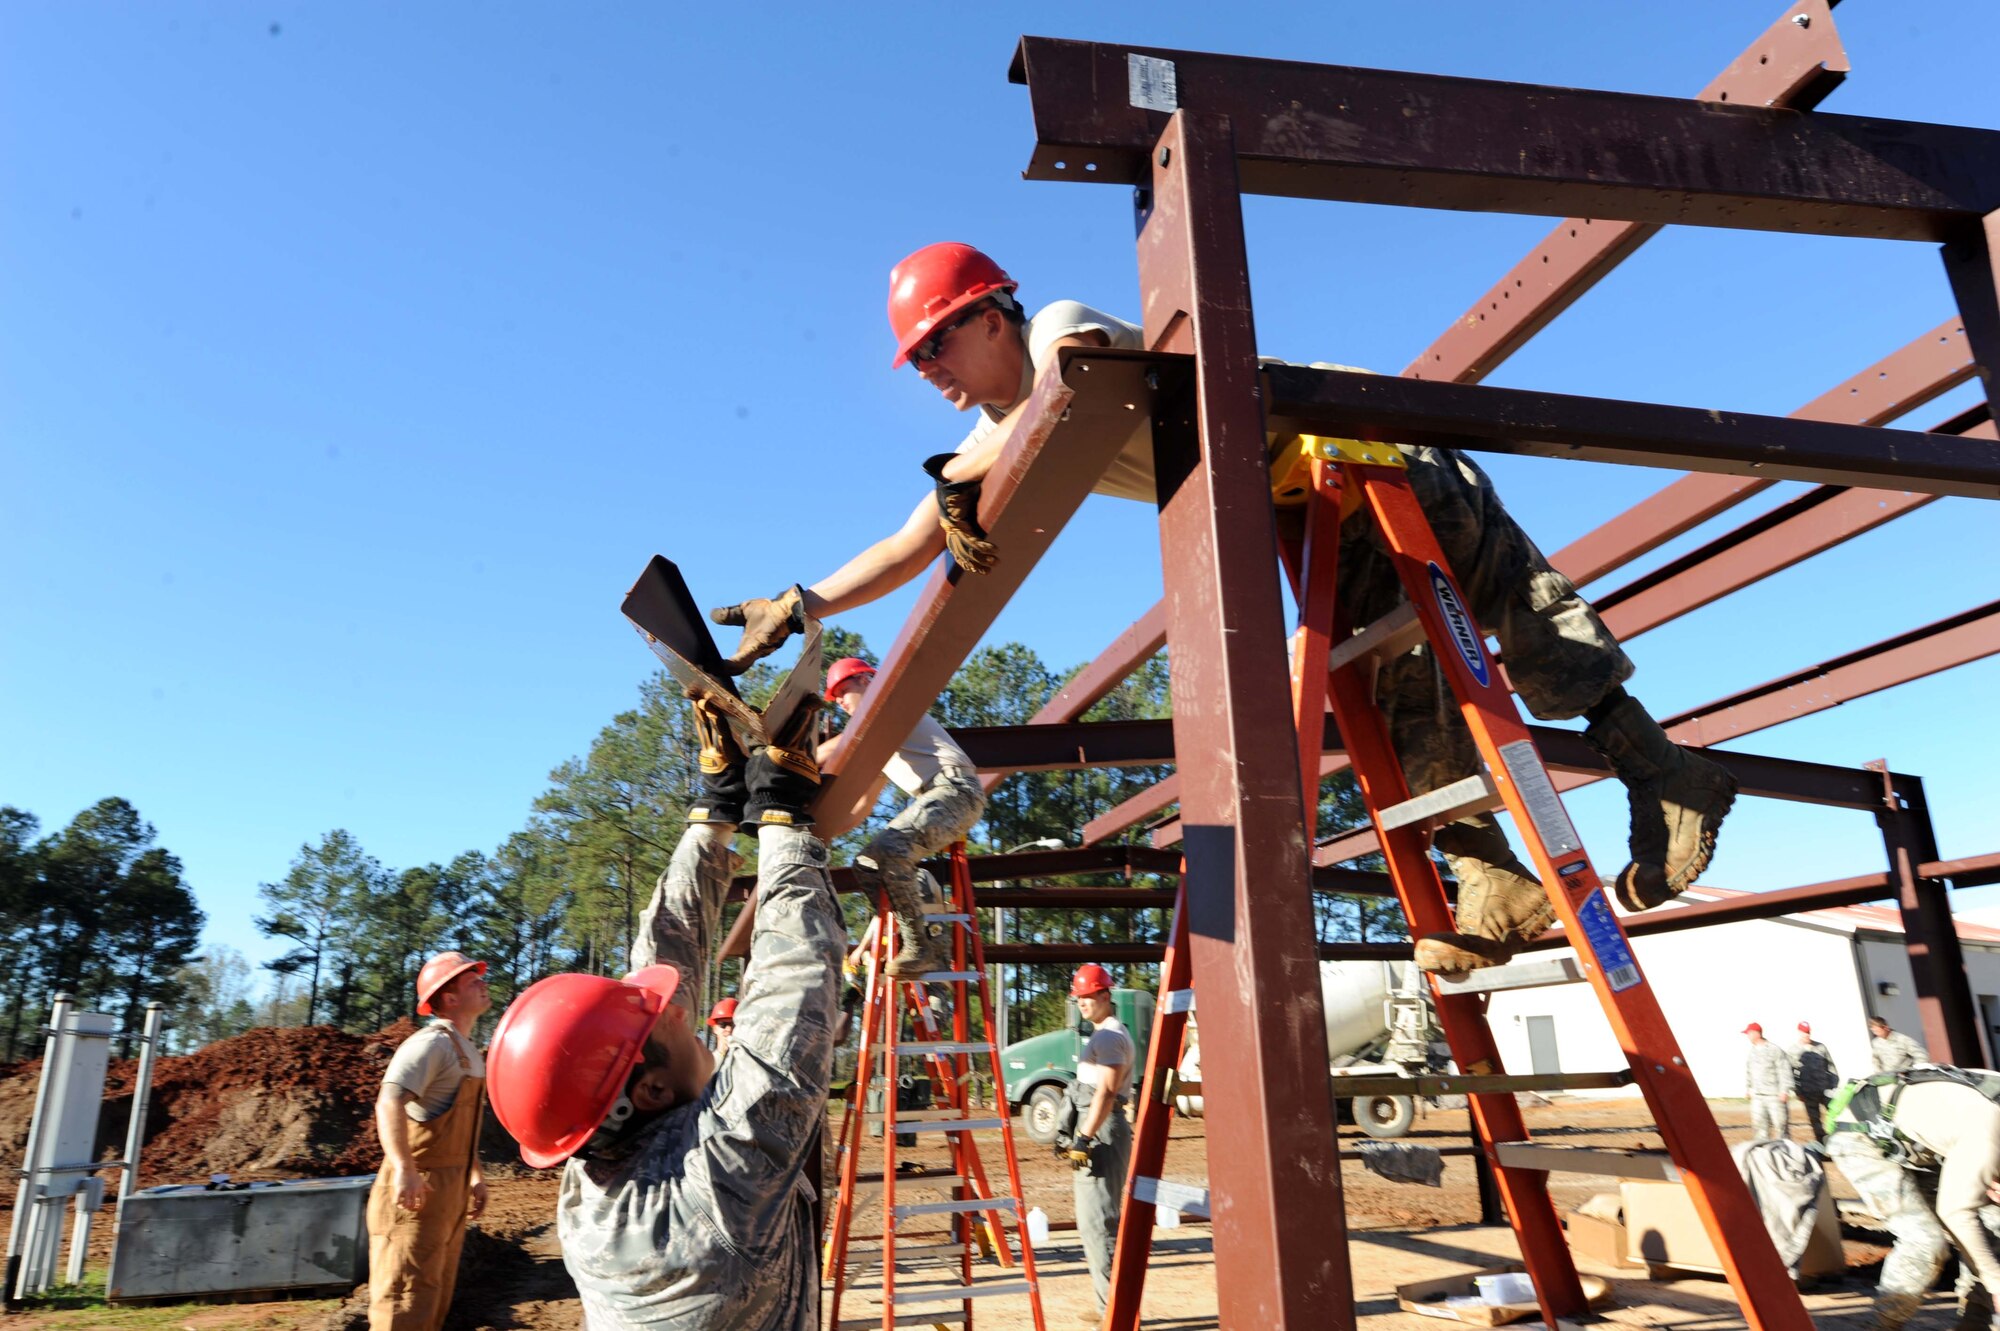 Airmen from the 823rd Rapid Engineer Deployable Heavy Operational Repair Squadron Engineer (RED HORSE) from Hurlburt Field, Florida, assemble the support beams for a pre-engineered building at the Vigilant Warrior training site Dec. 15, 2015, near Titus, Alabama. RED HORSE Squadrons travel base to base doing heavy construction projects for the Air Force.  (U.S. Air Force photo by Airman 1st Class Alexa Culbert)